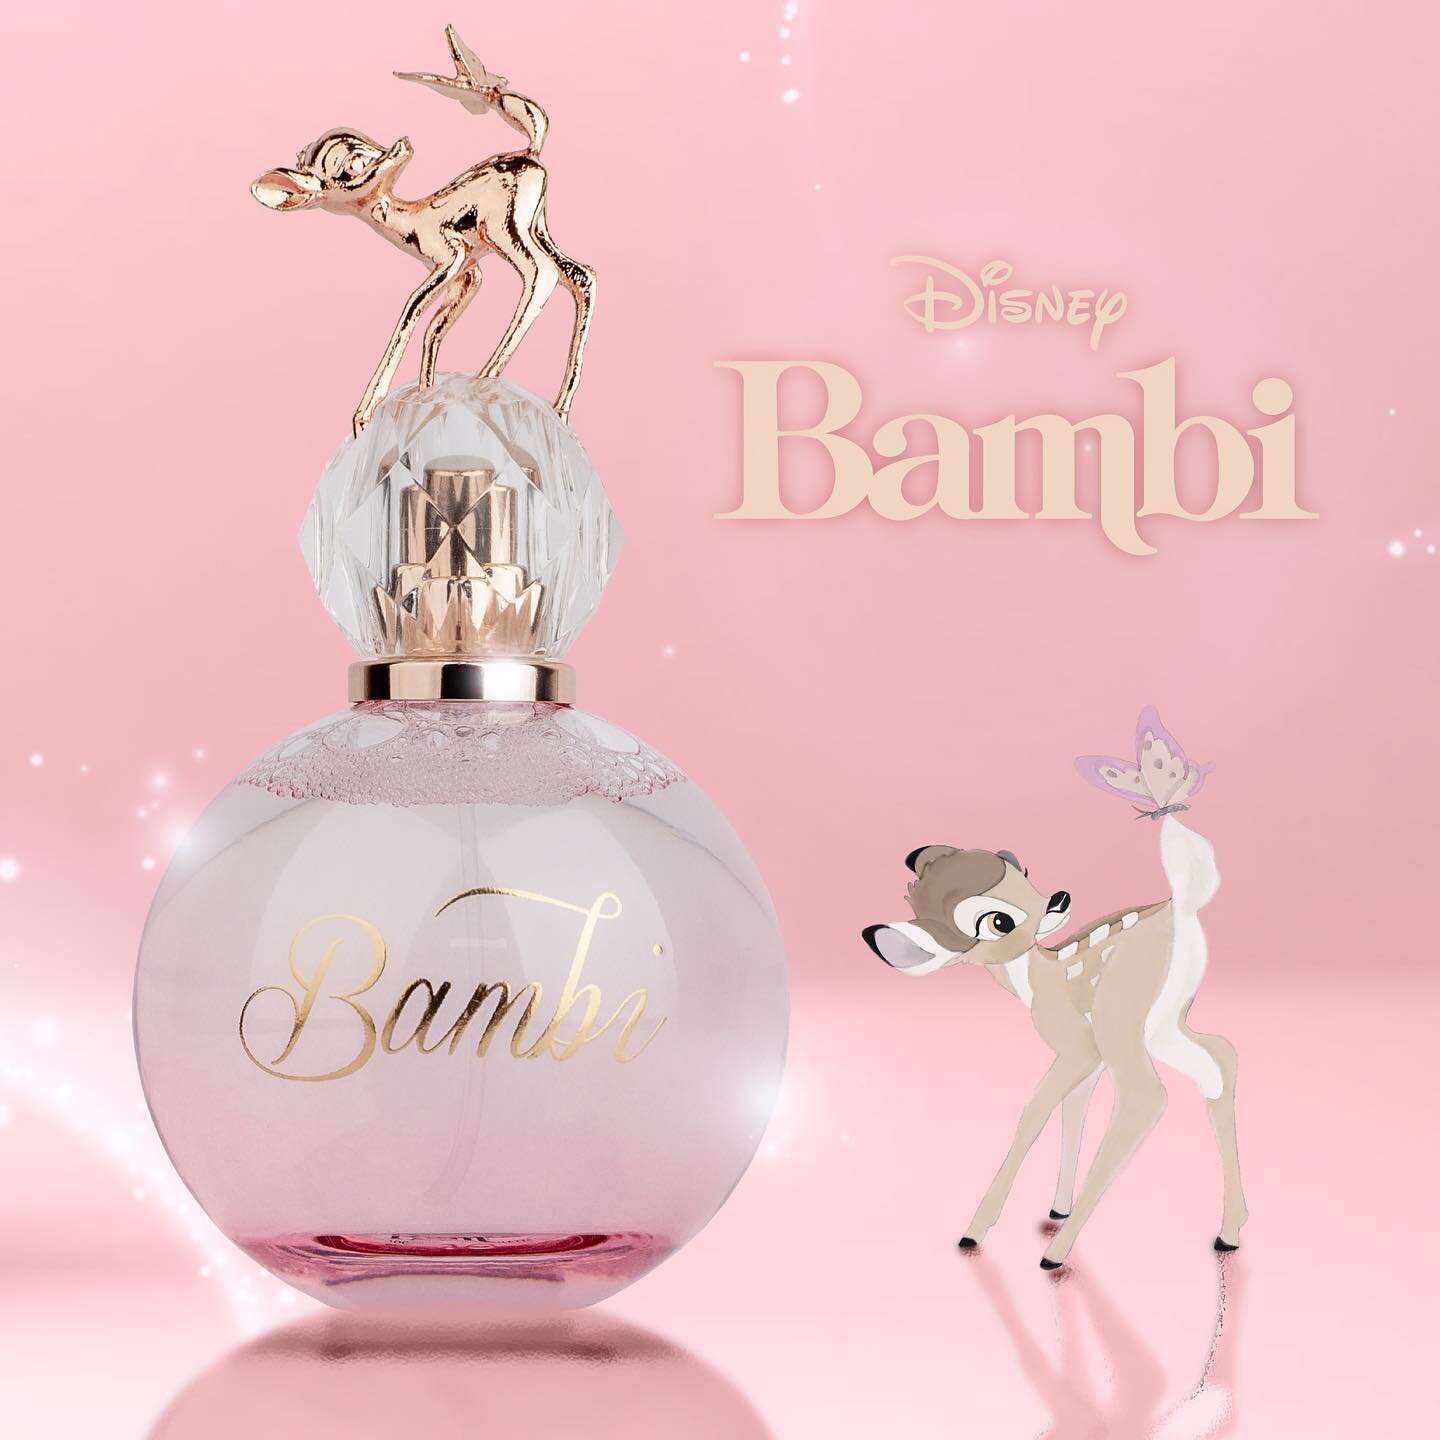 With it&rsquo;s elegant design and timeless aroma, this Bambi fragrance makes a wonderful addition to any  fragrance collection, designed for Disney fans of all ages. With a whimsical  fragrance profile that&rsquo;s as enchanting as Bambi herself.

A